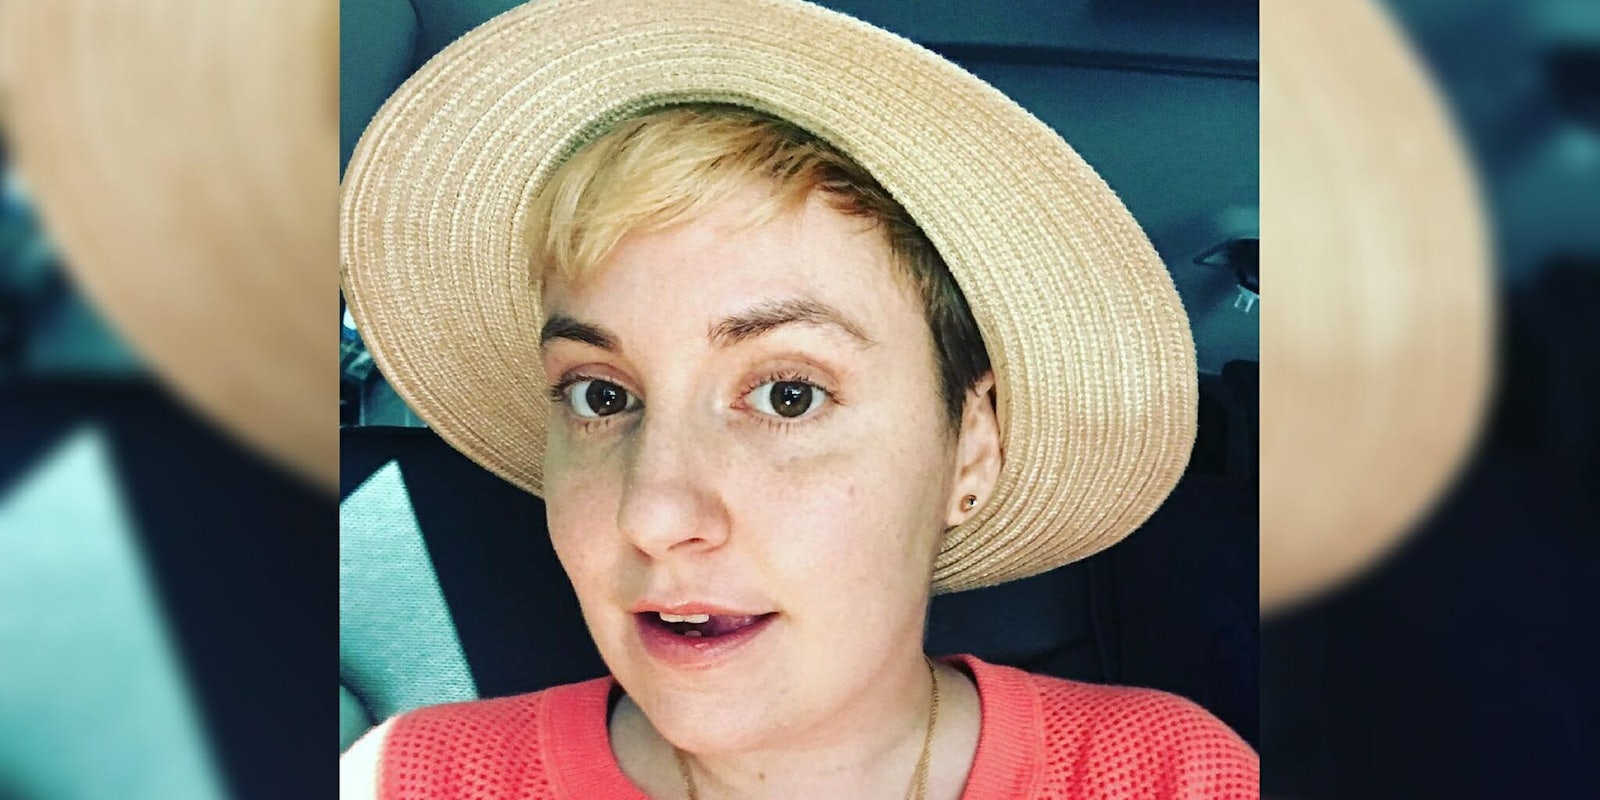 Lena Dunham has defended a 'Girls' writer for allegations of sexual assault.